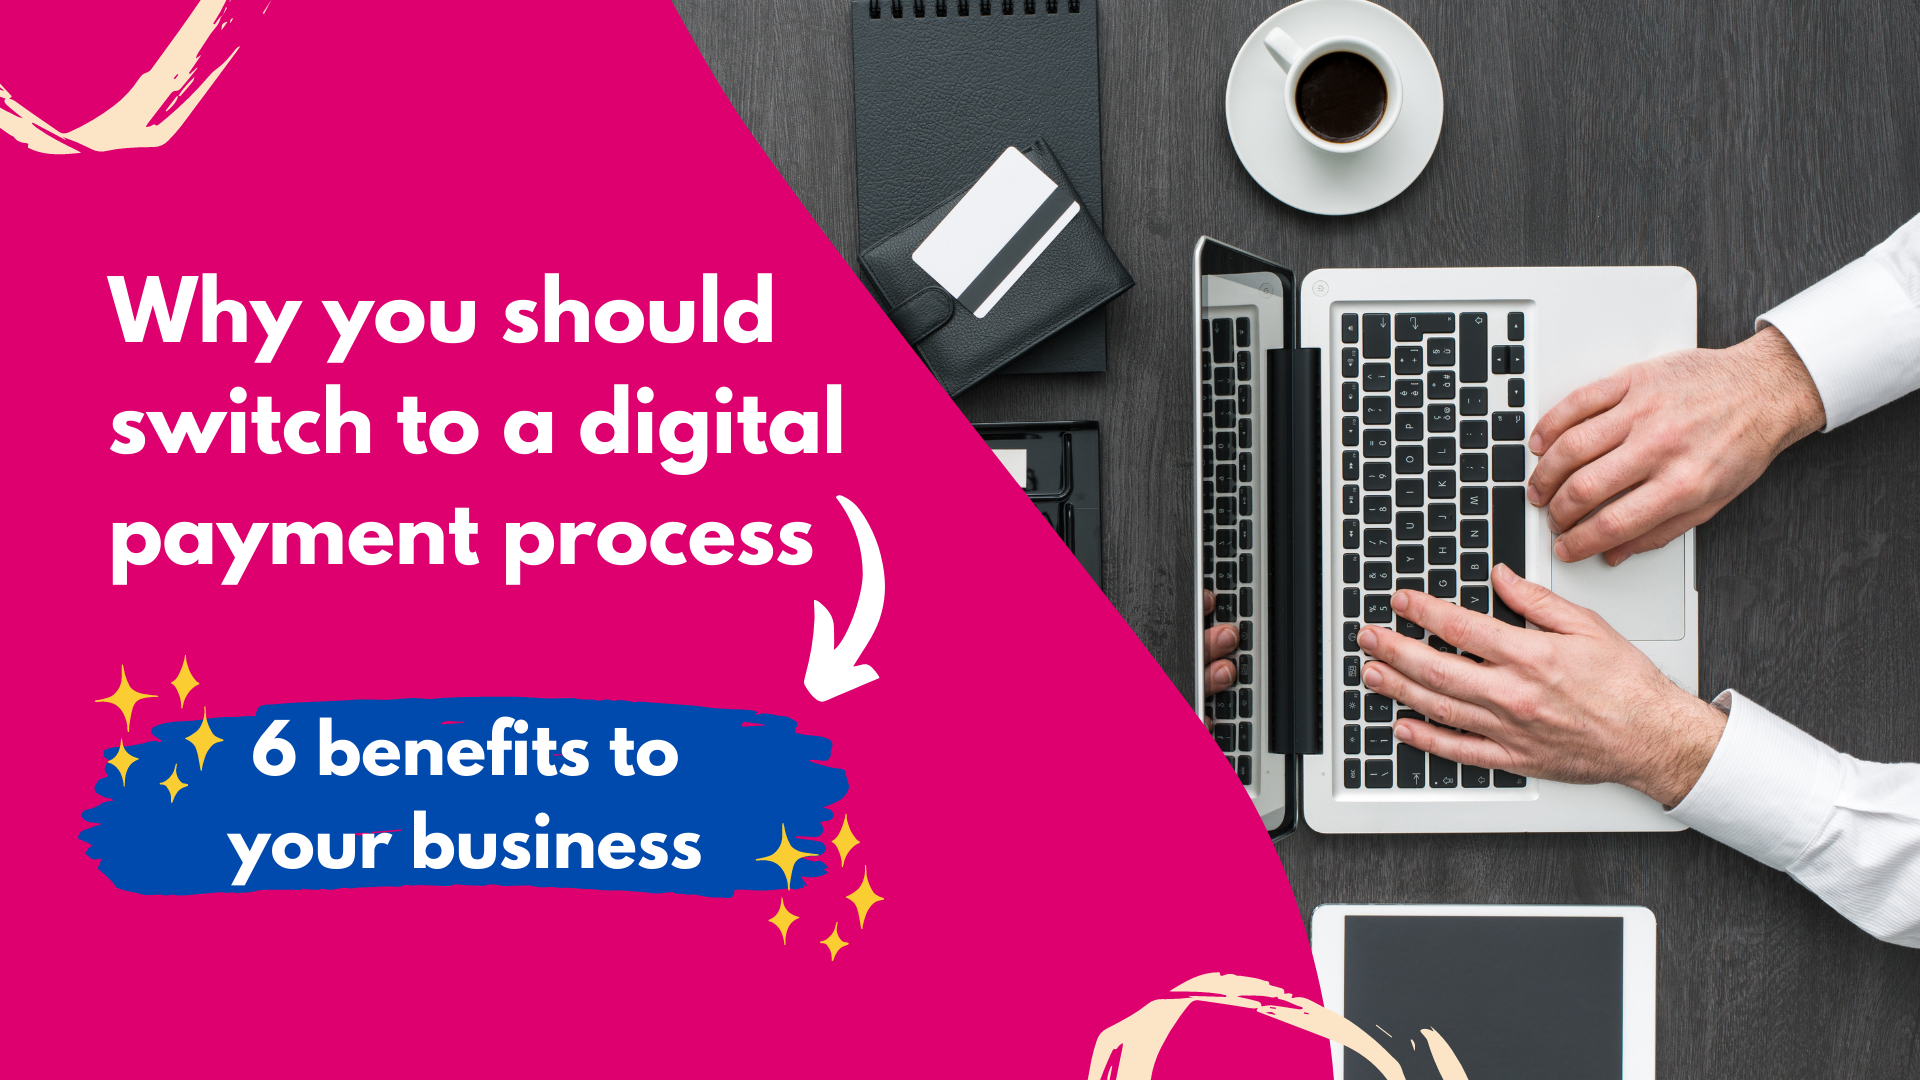 Why should I switch to a digital payment process?